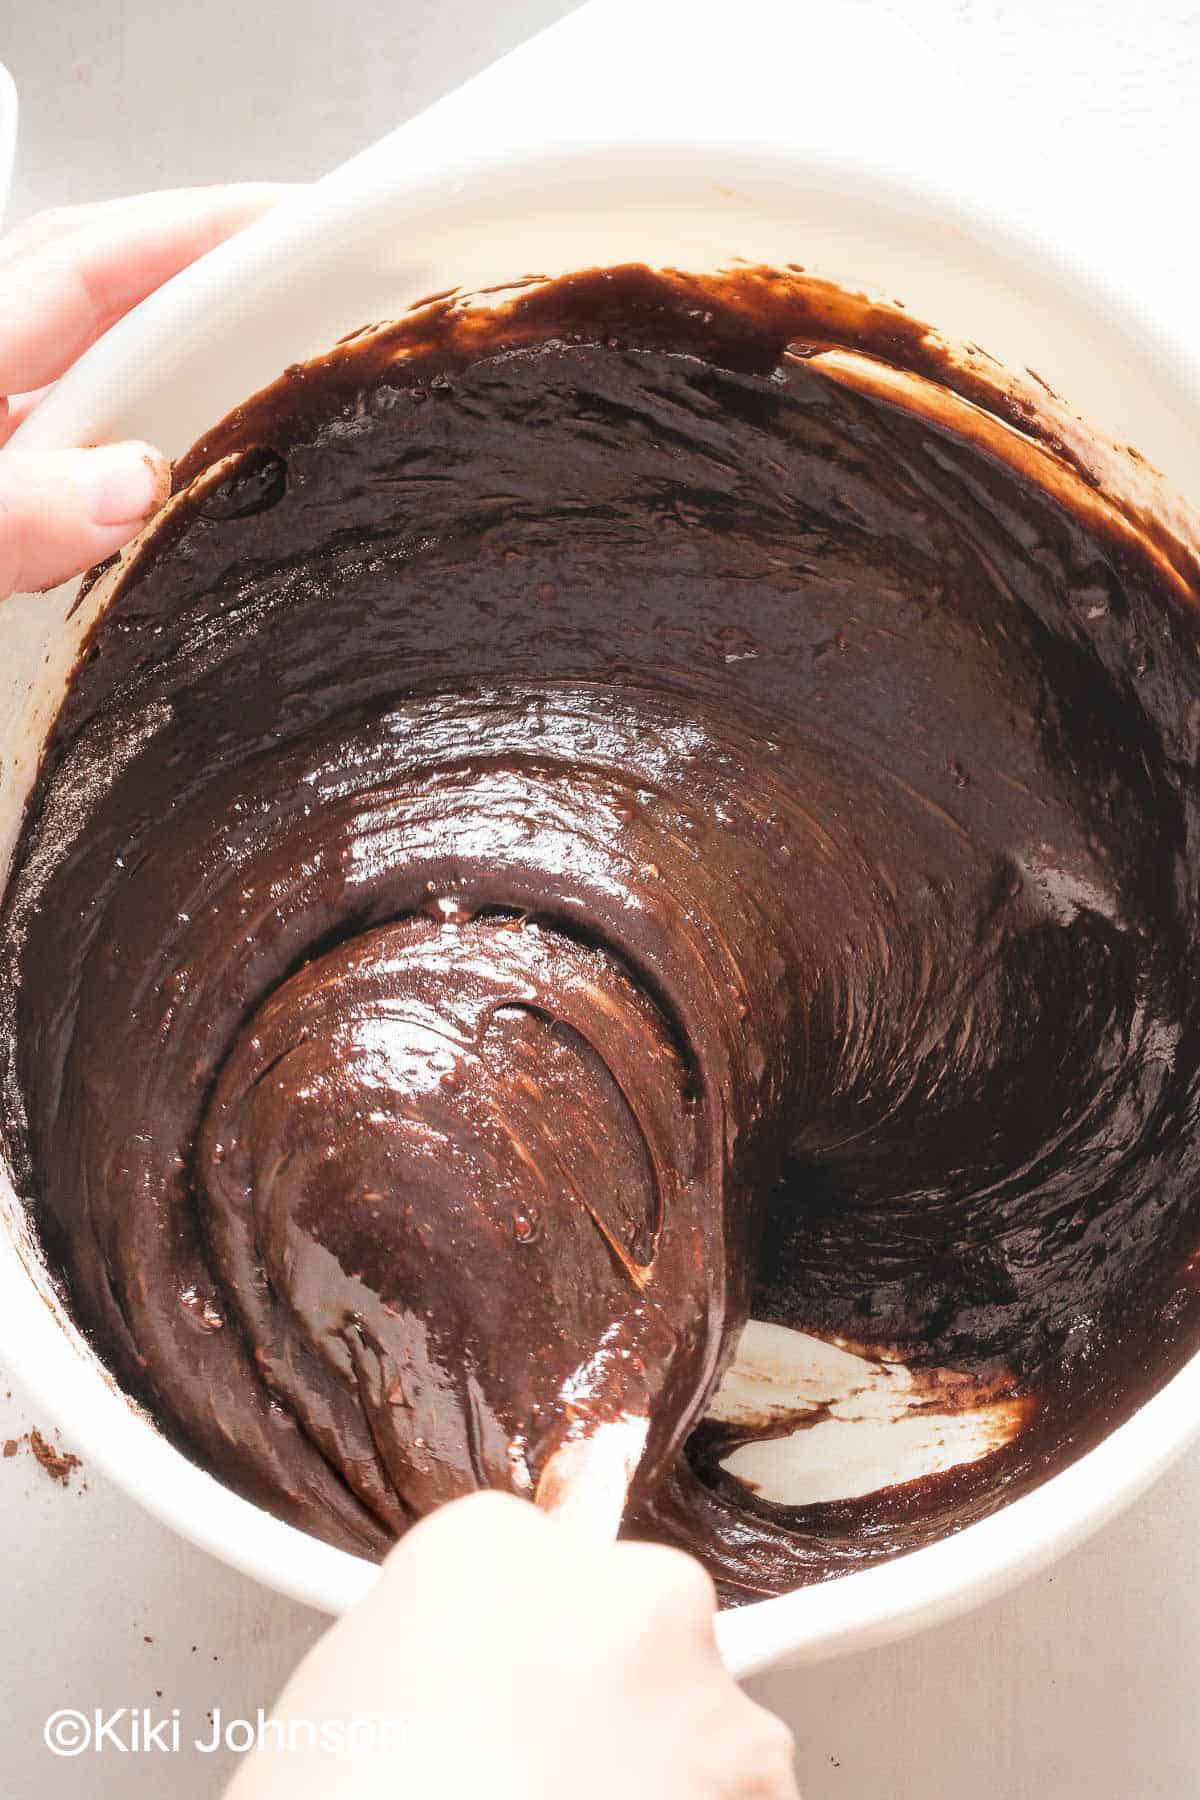 vegan chocolate cake batter being mixed in a bowl